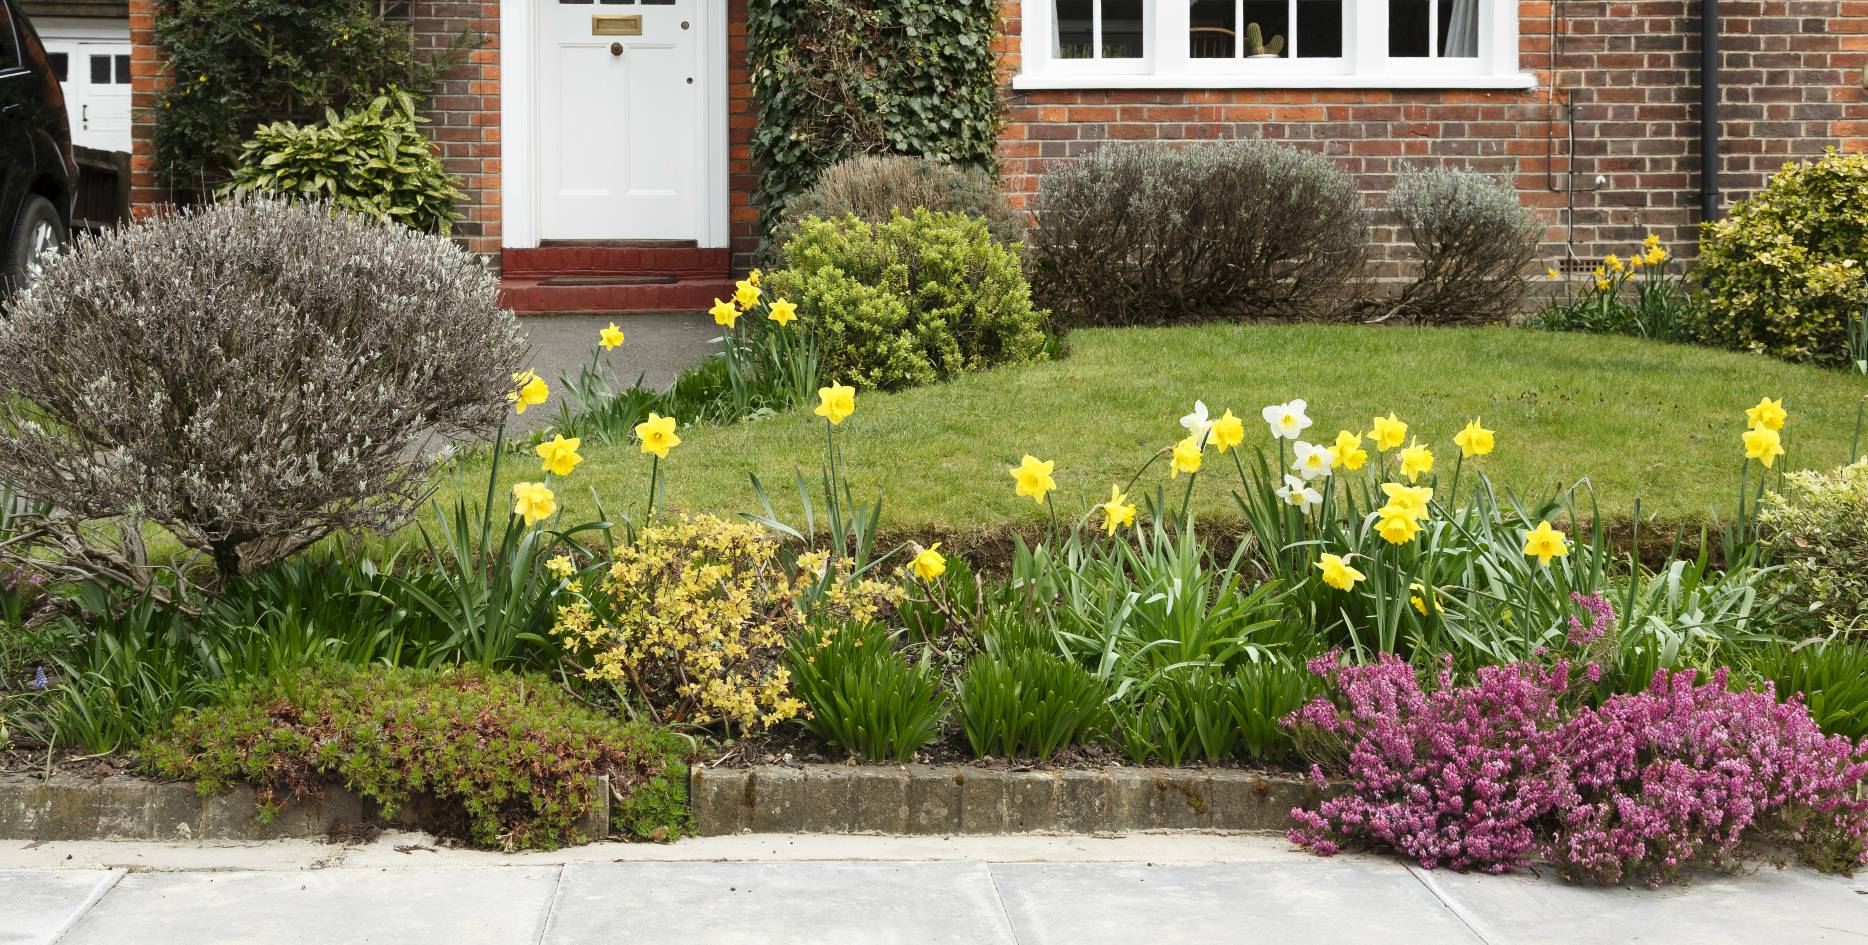 Image of stone border on garden in bloom